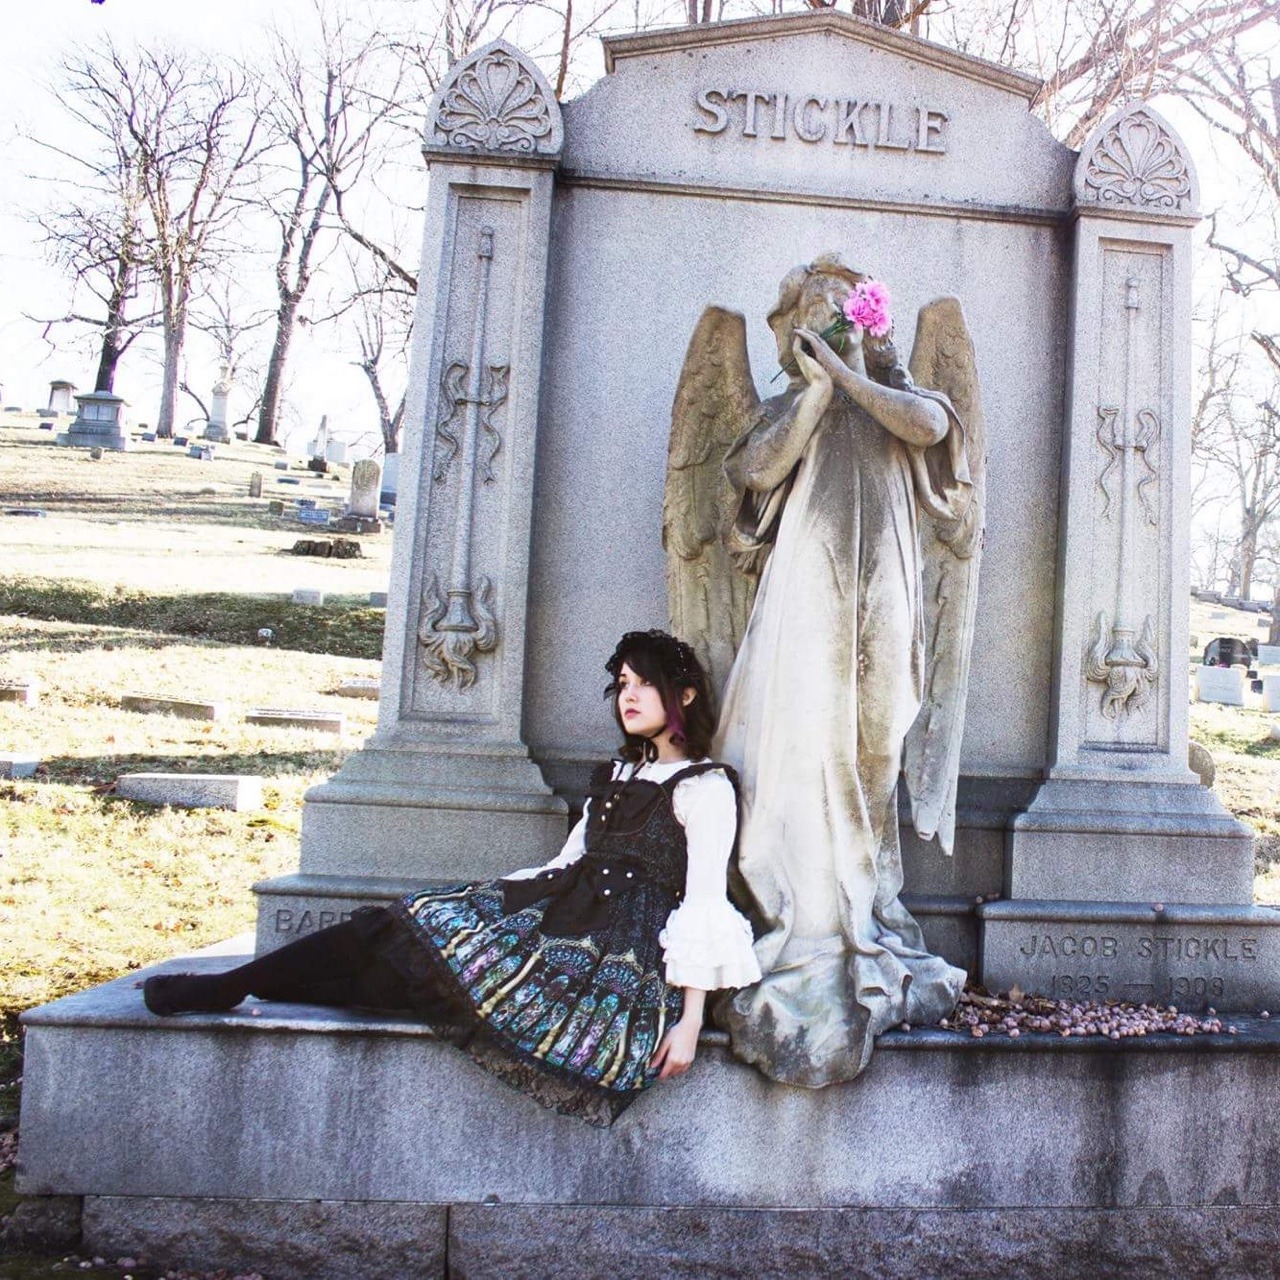 Me wearing a stained glass print dress, stretched on a gravestone